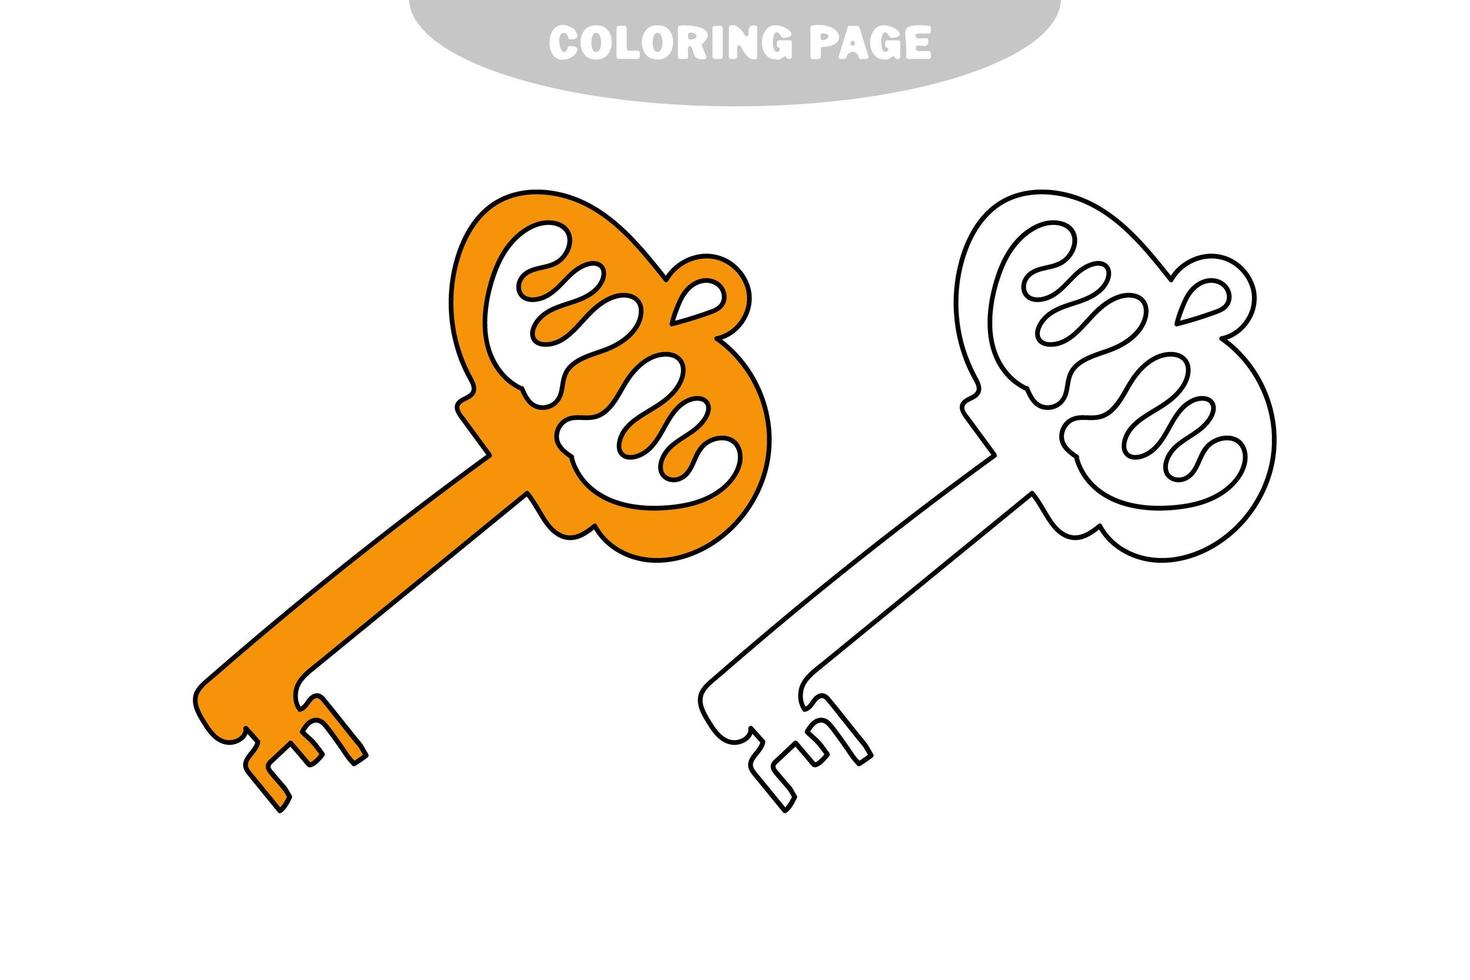 Simple coloring page. Vintage key. Black and white image for coloring book vector